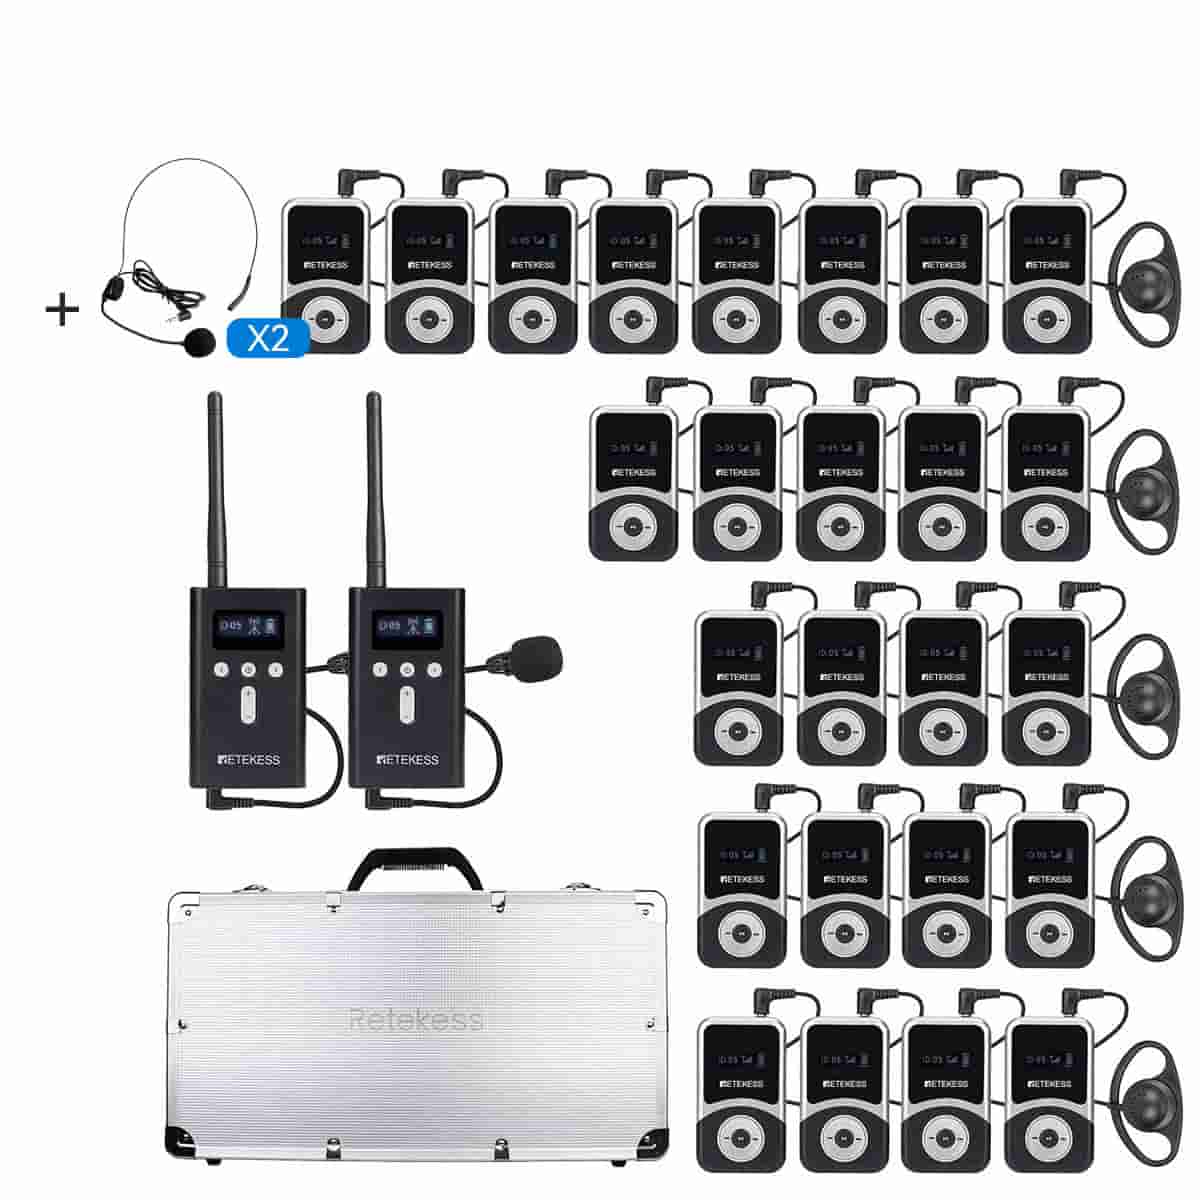 Retekess T130S T131S Tour Audio Systems for Tourism with Charging Case 2TX+25RX+1Charge Case